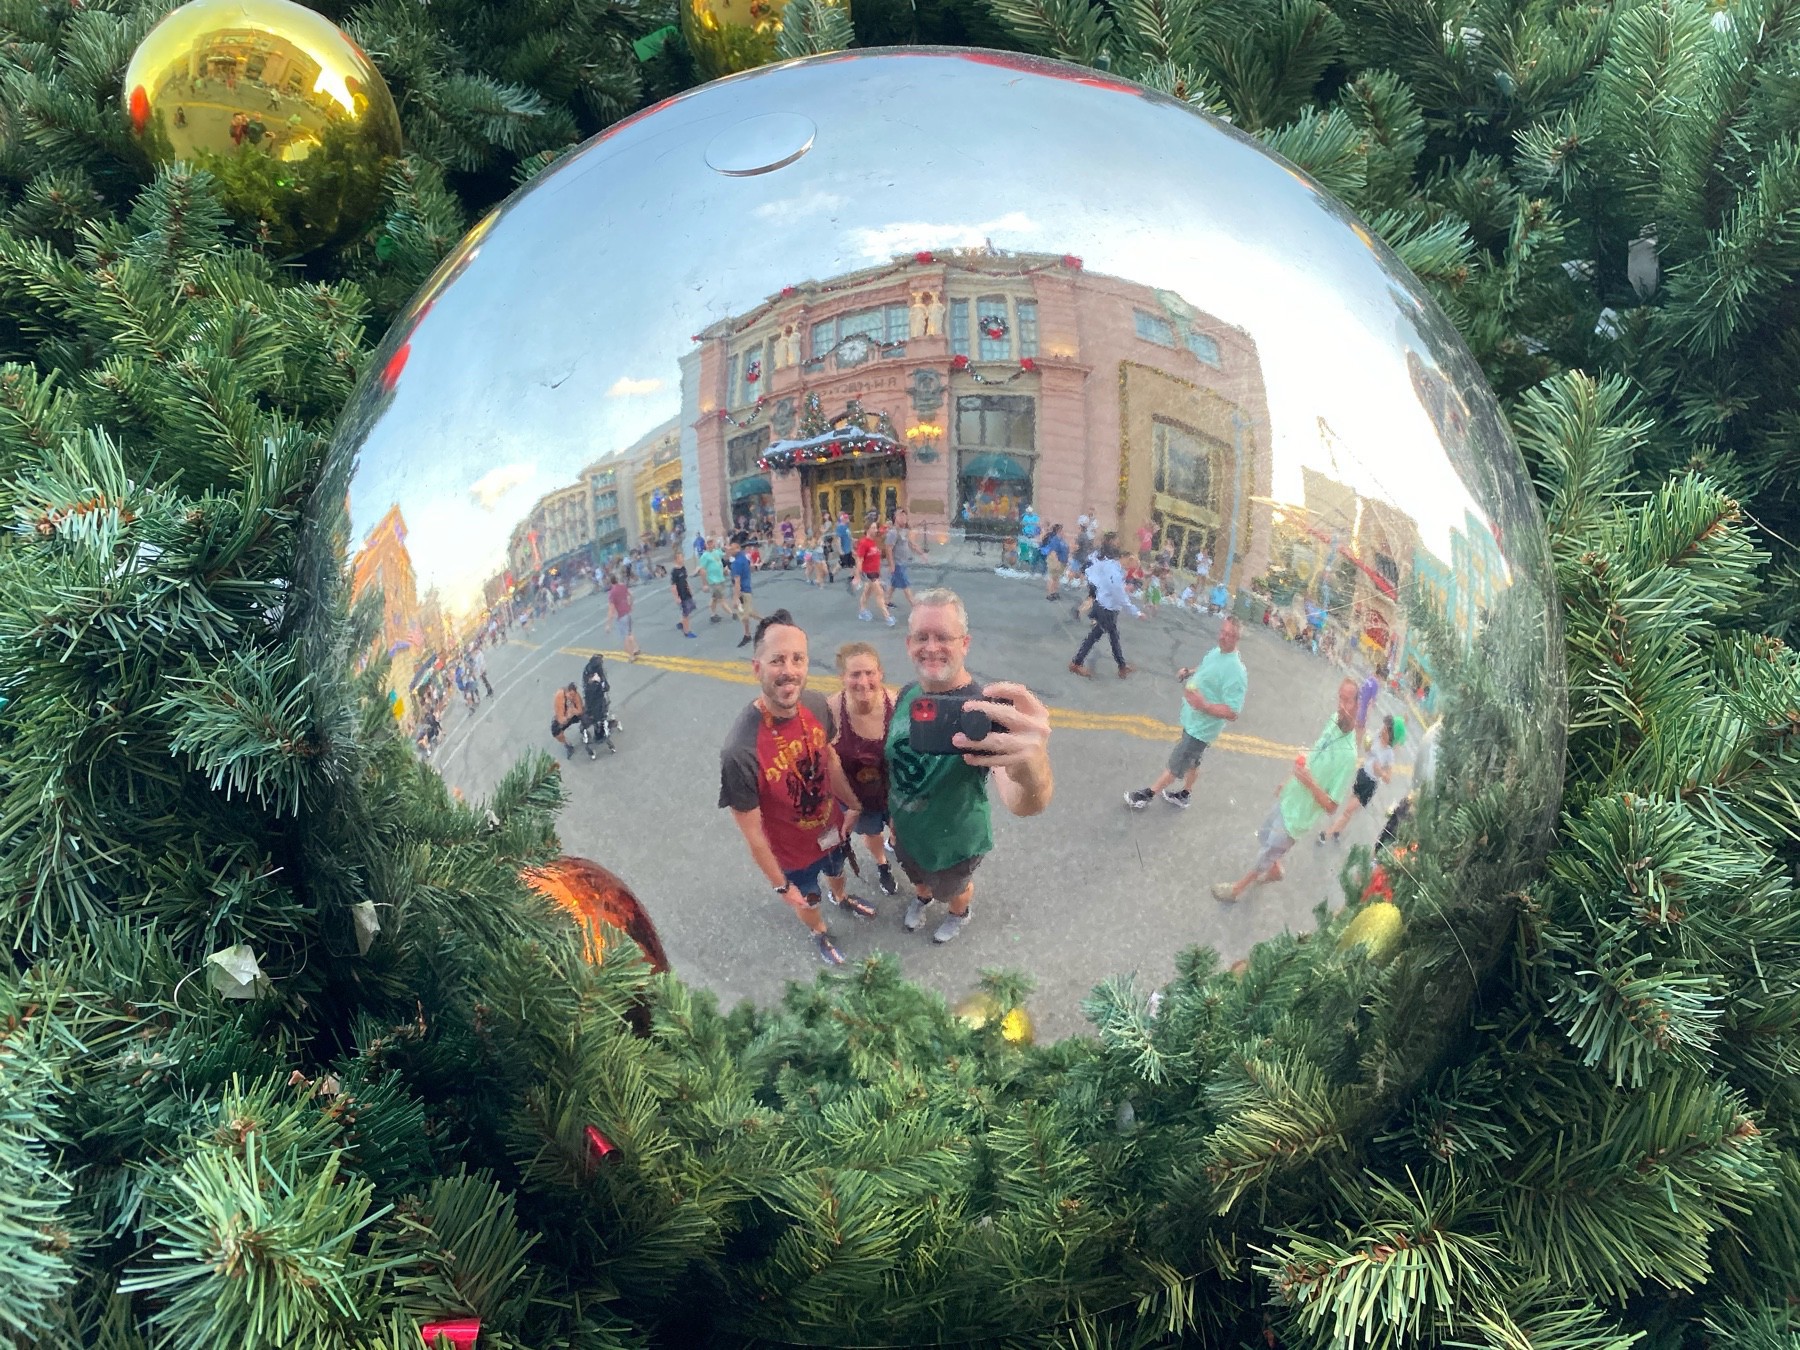 A group of three people (one female and two males) take a photo of their reflection in a giant, silver Christmas tree ornament with buildings in the background.